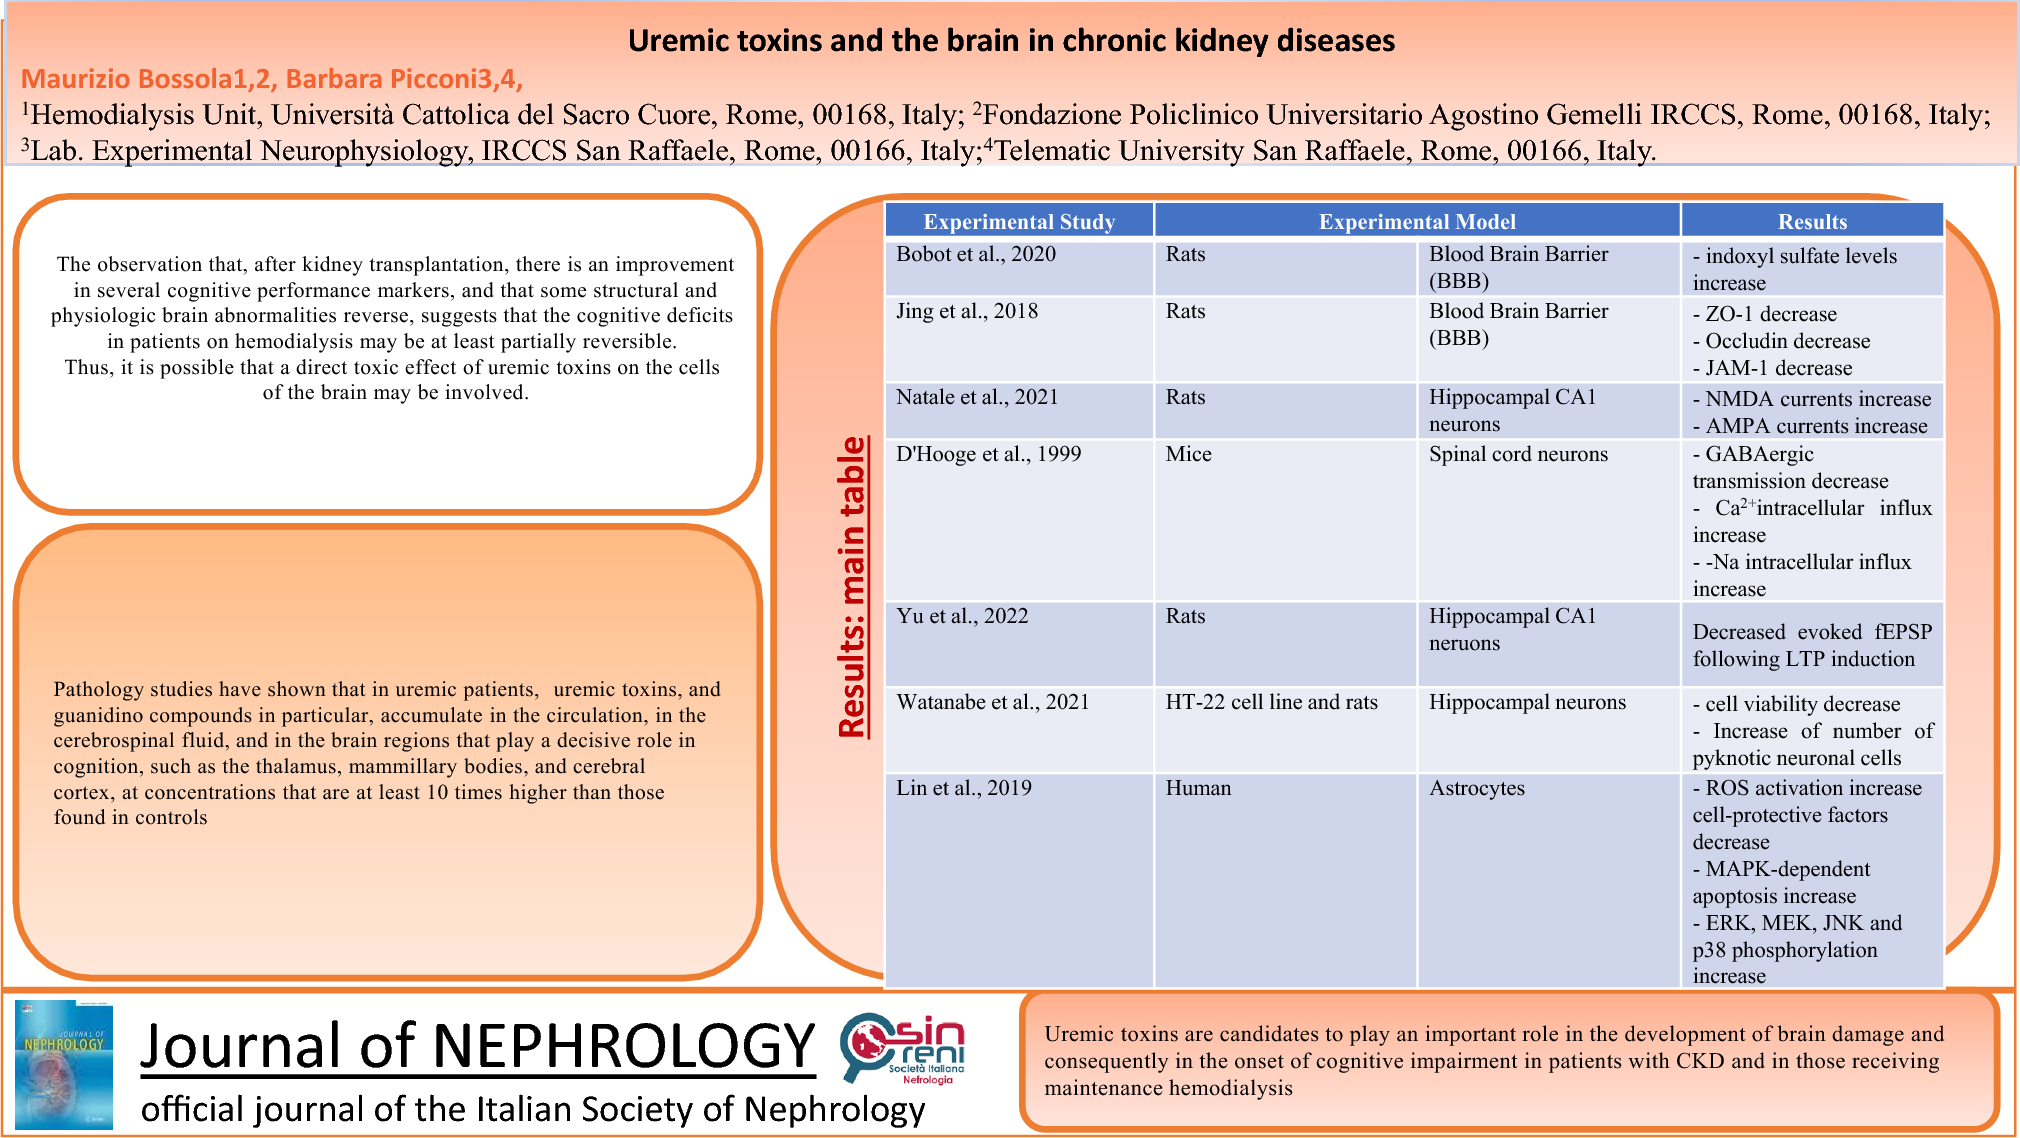 Uremic toxins and the brain in chronic kidney disease